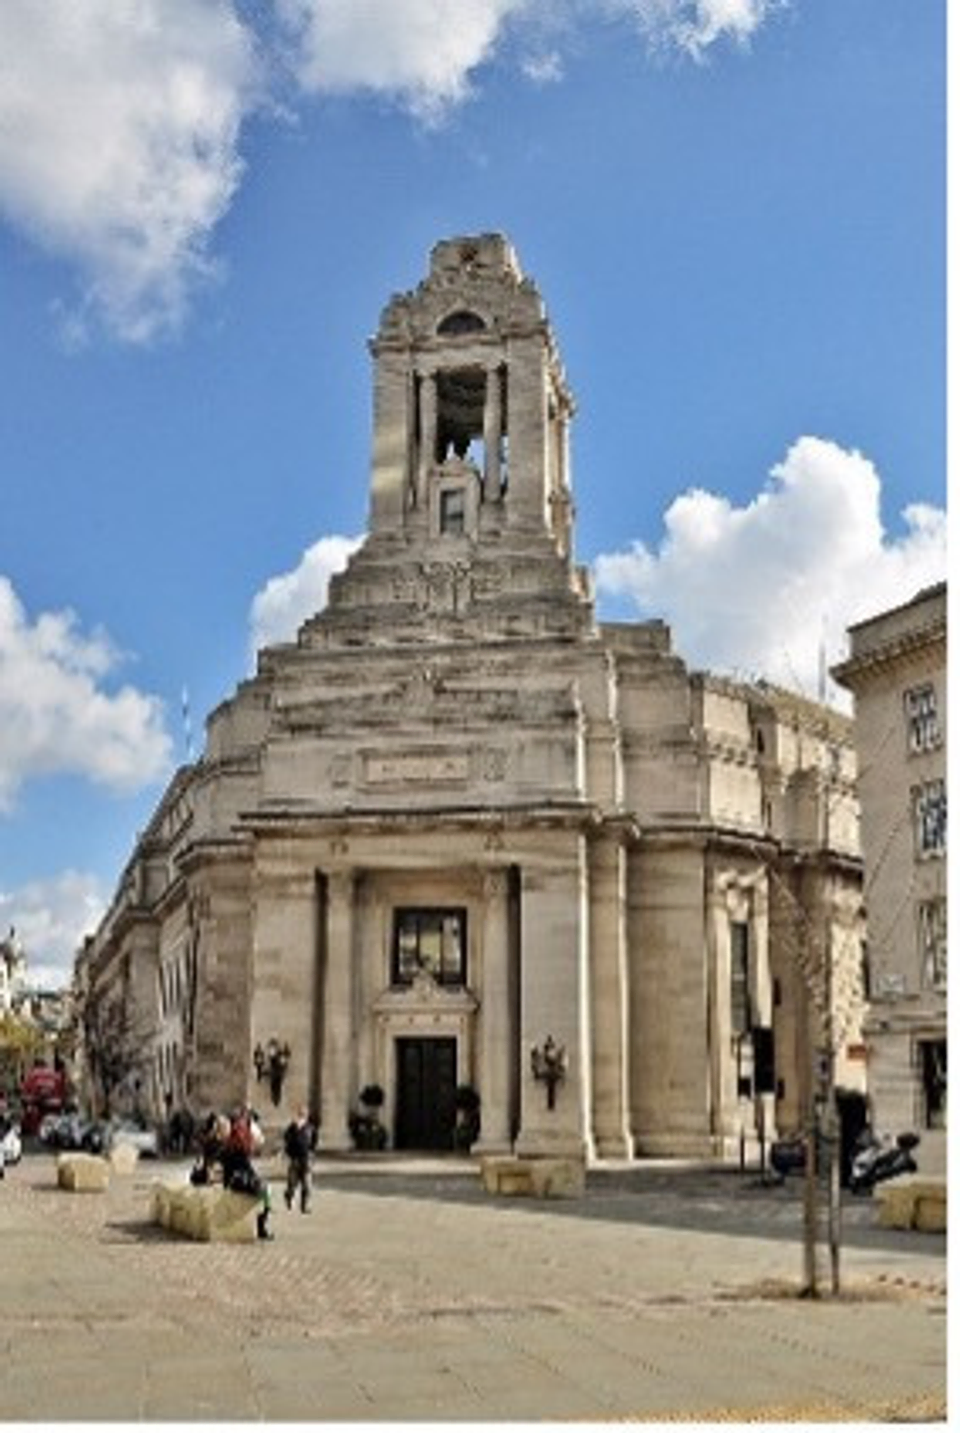 A photo of the headquarters of the Grand Lodge of England